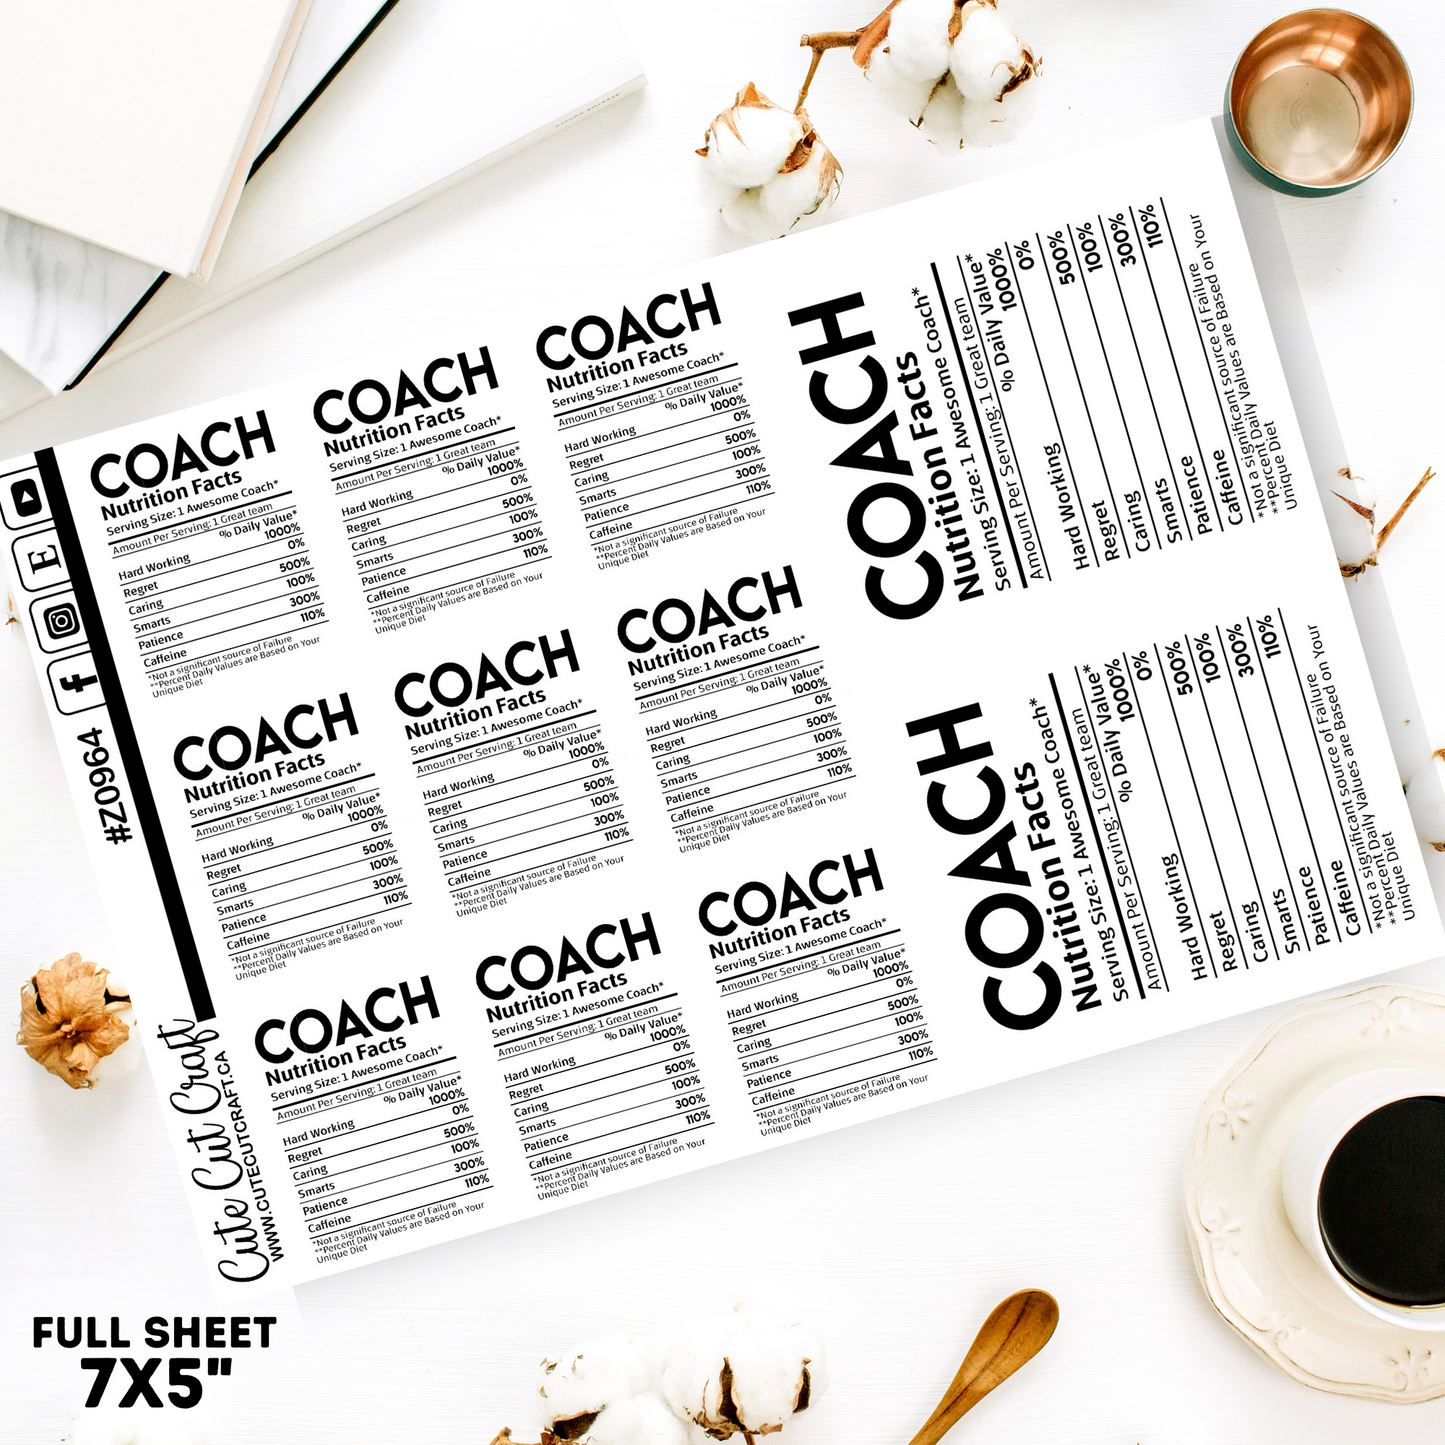 Coach Facts || Quote Sheet